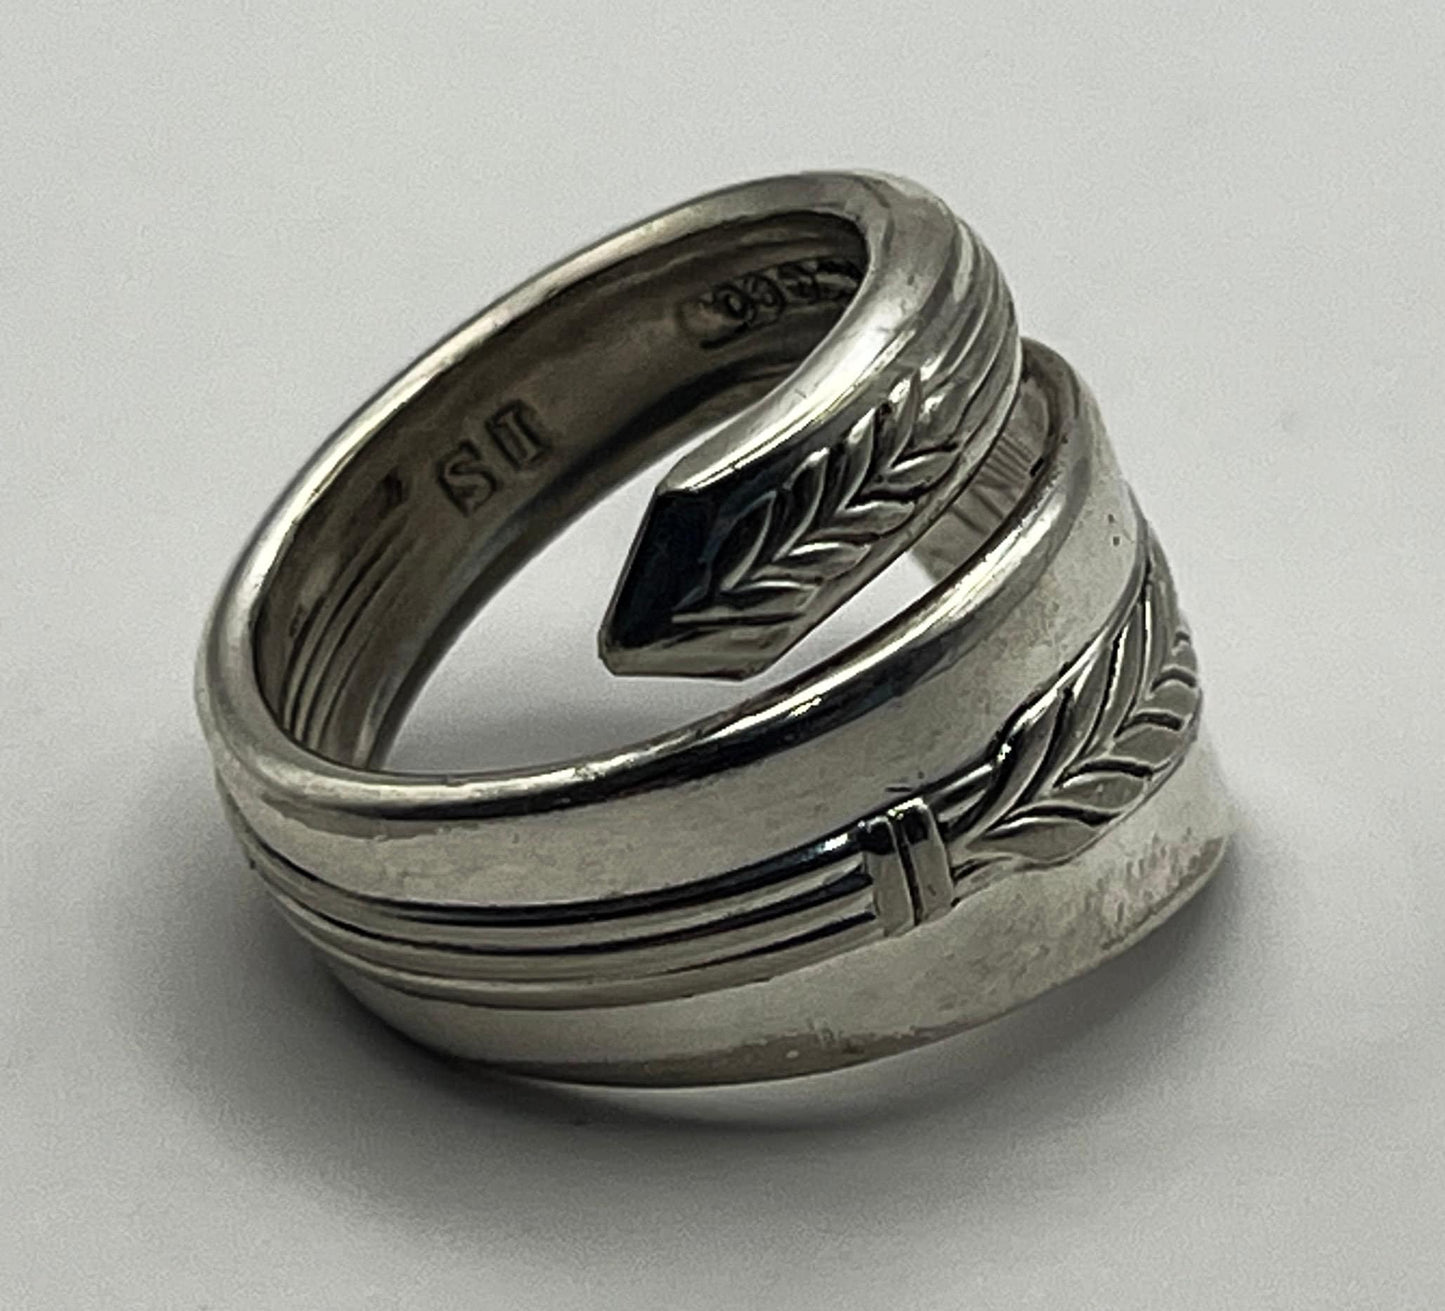 Spoon Ring Jewelry Statement Ring